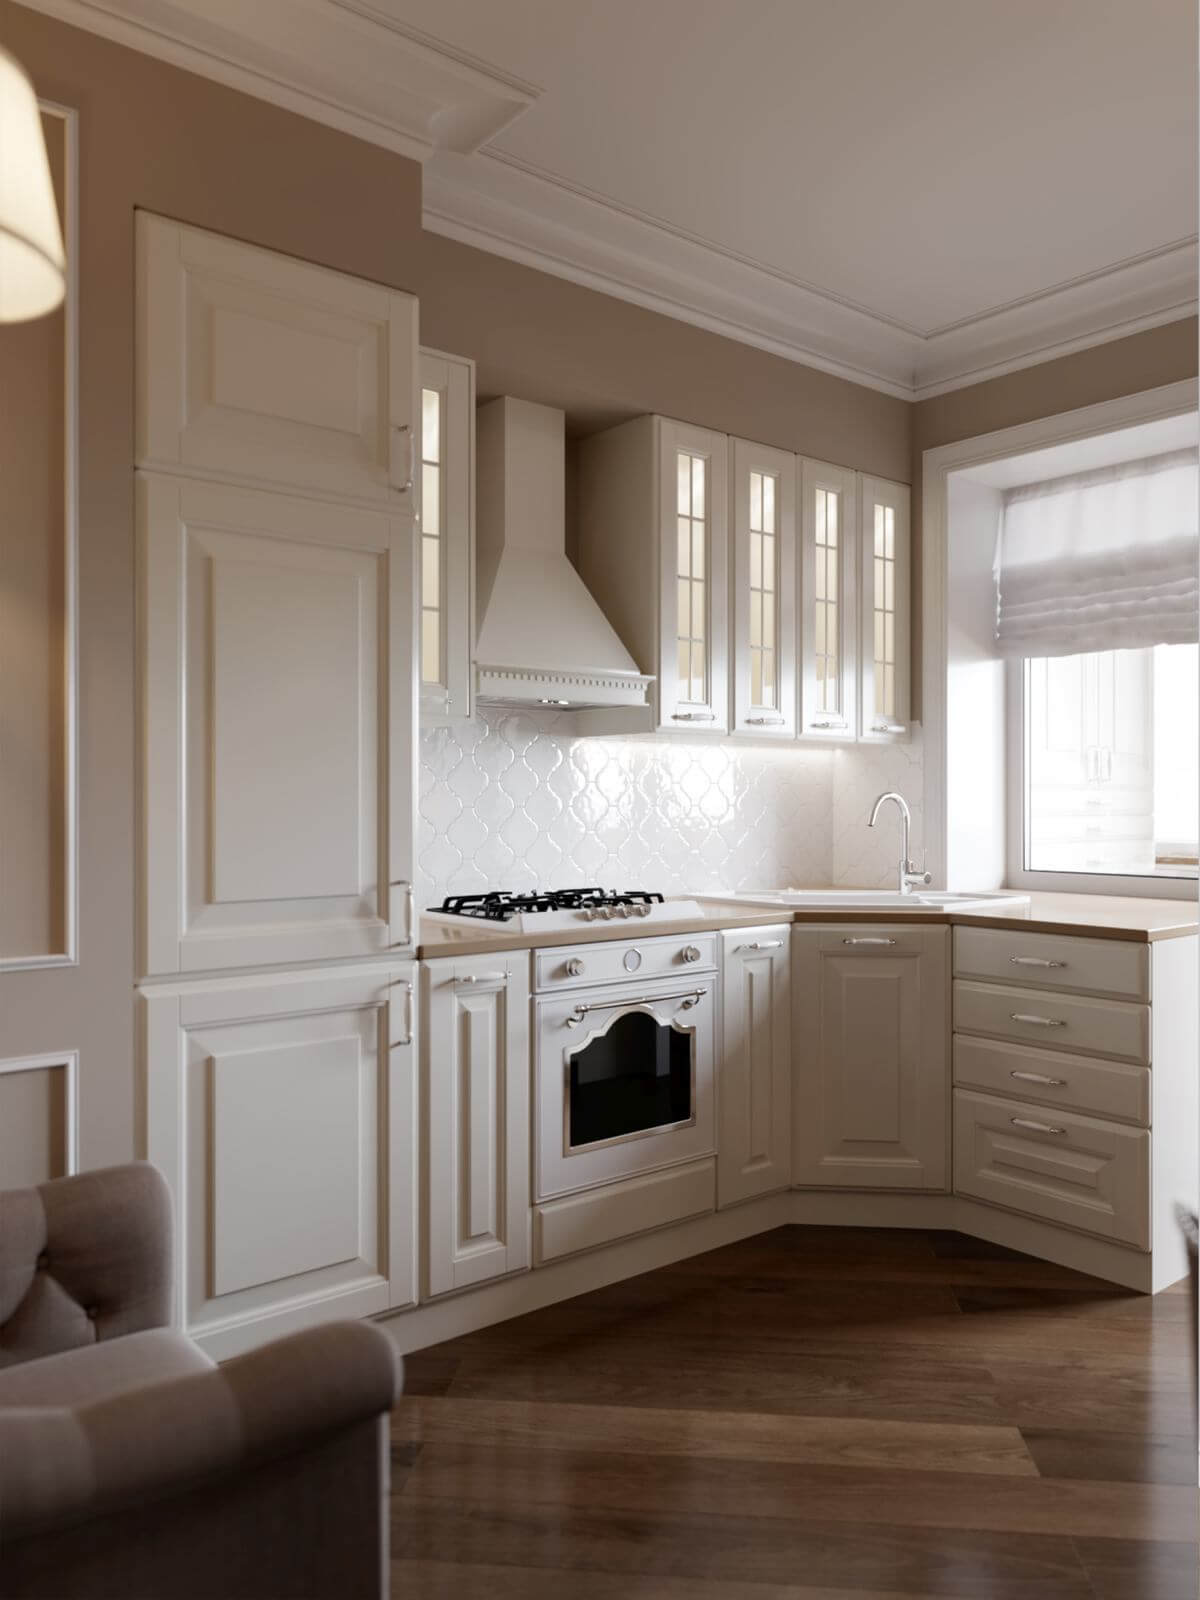 Elegant classic kitchen interior design white and beige colors with wooden floor. 3d render